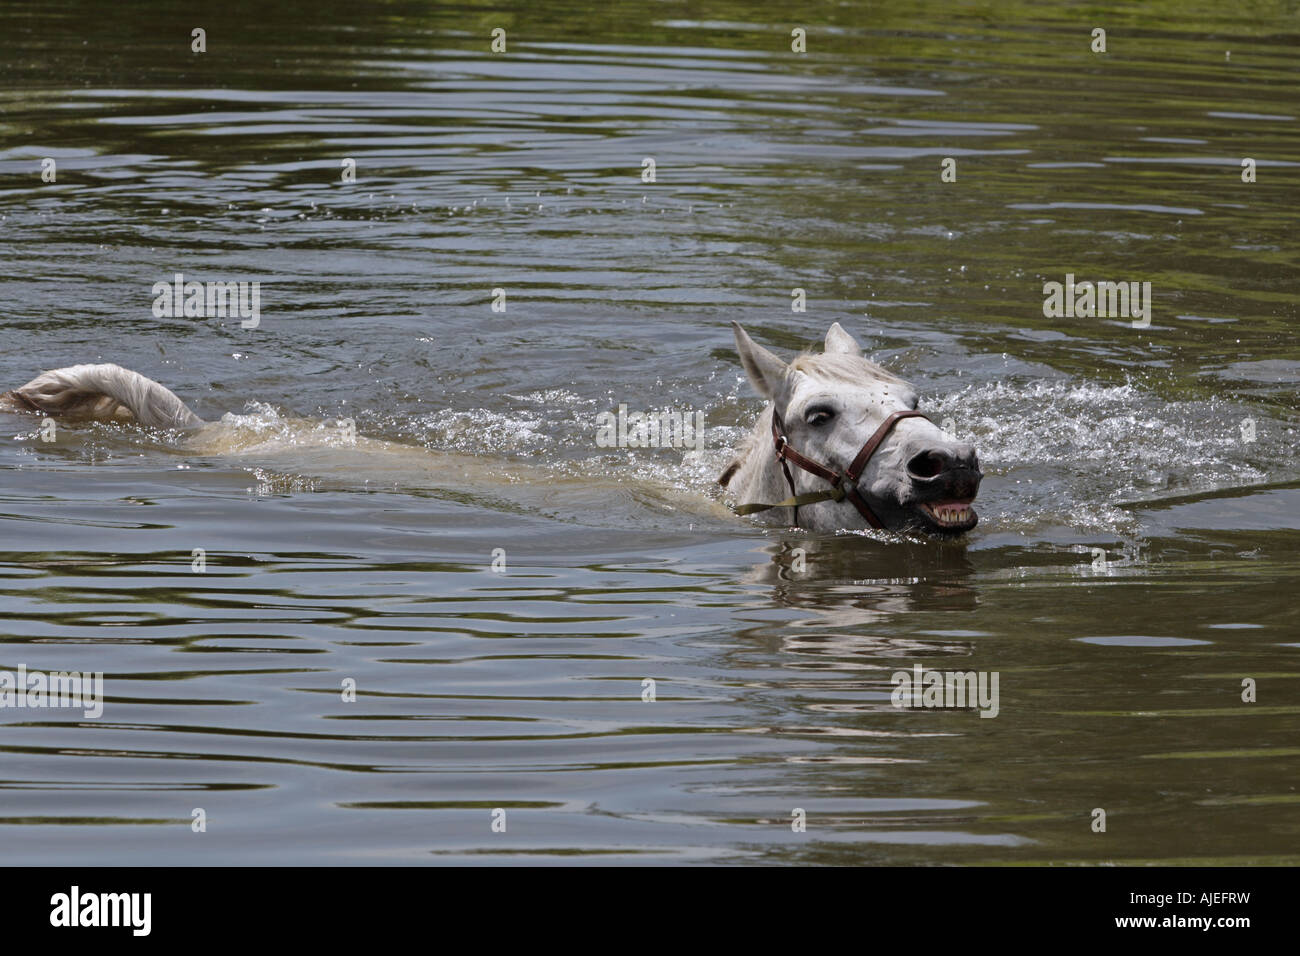 The horse crosses the river Stock Photo